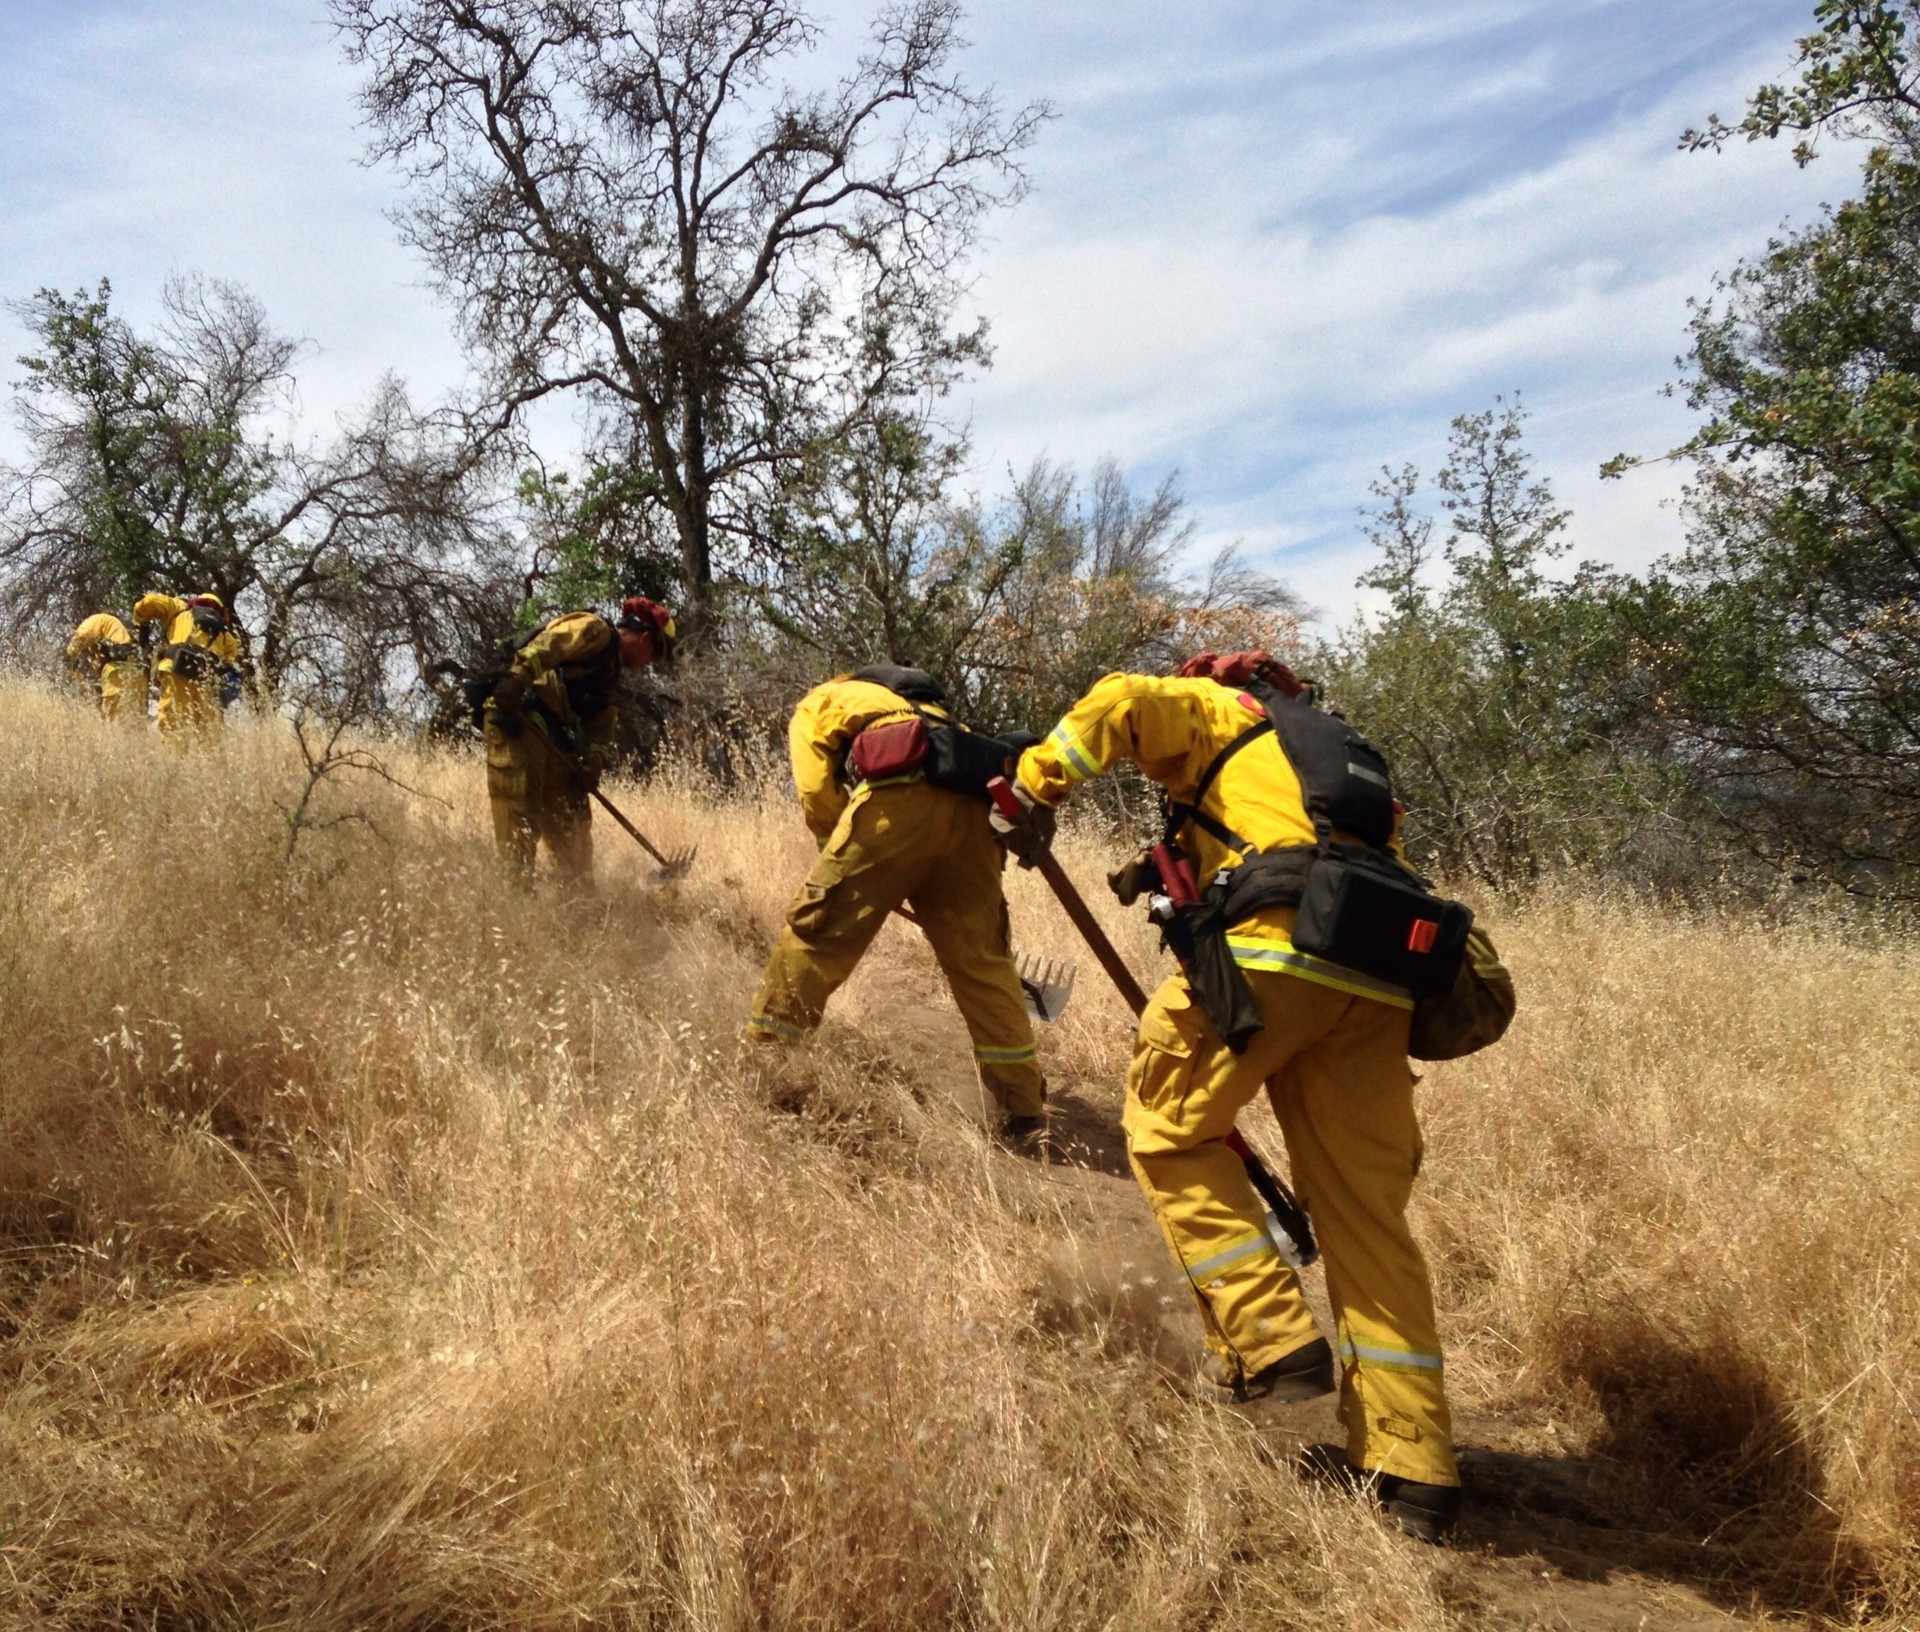 Crews clear a fire break in the Sierra foothills, in preparation for this summer's fire season.